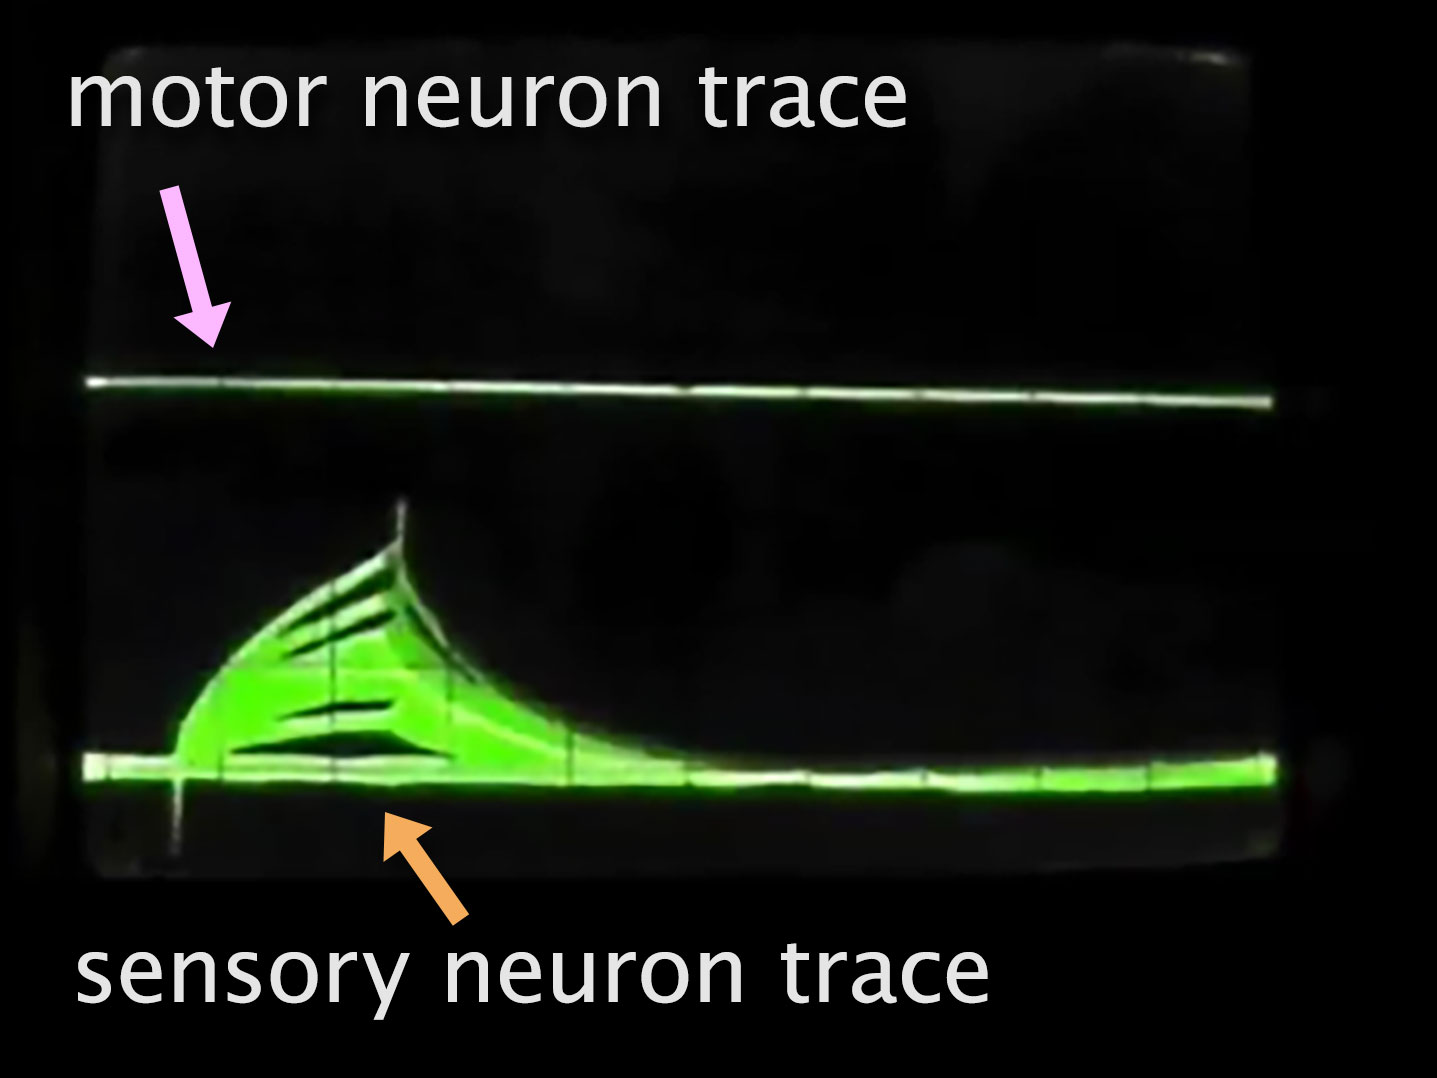 Dual electrical activity graph of sensory and motor neurons.